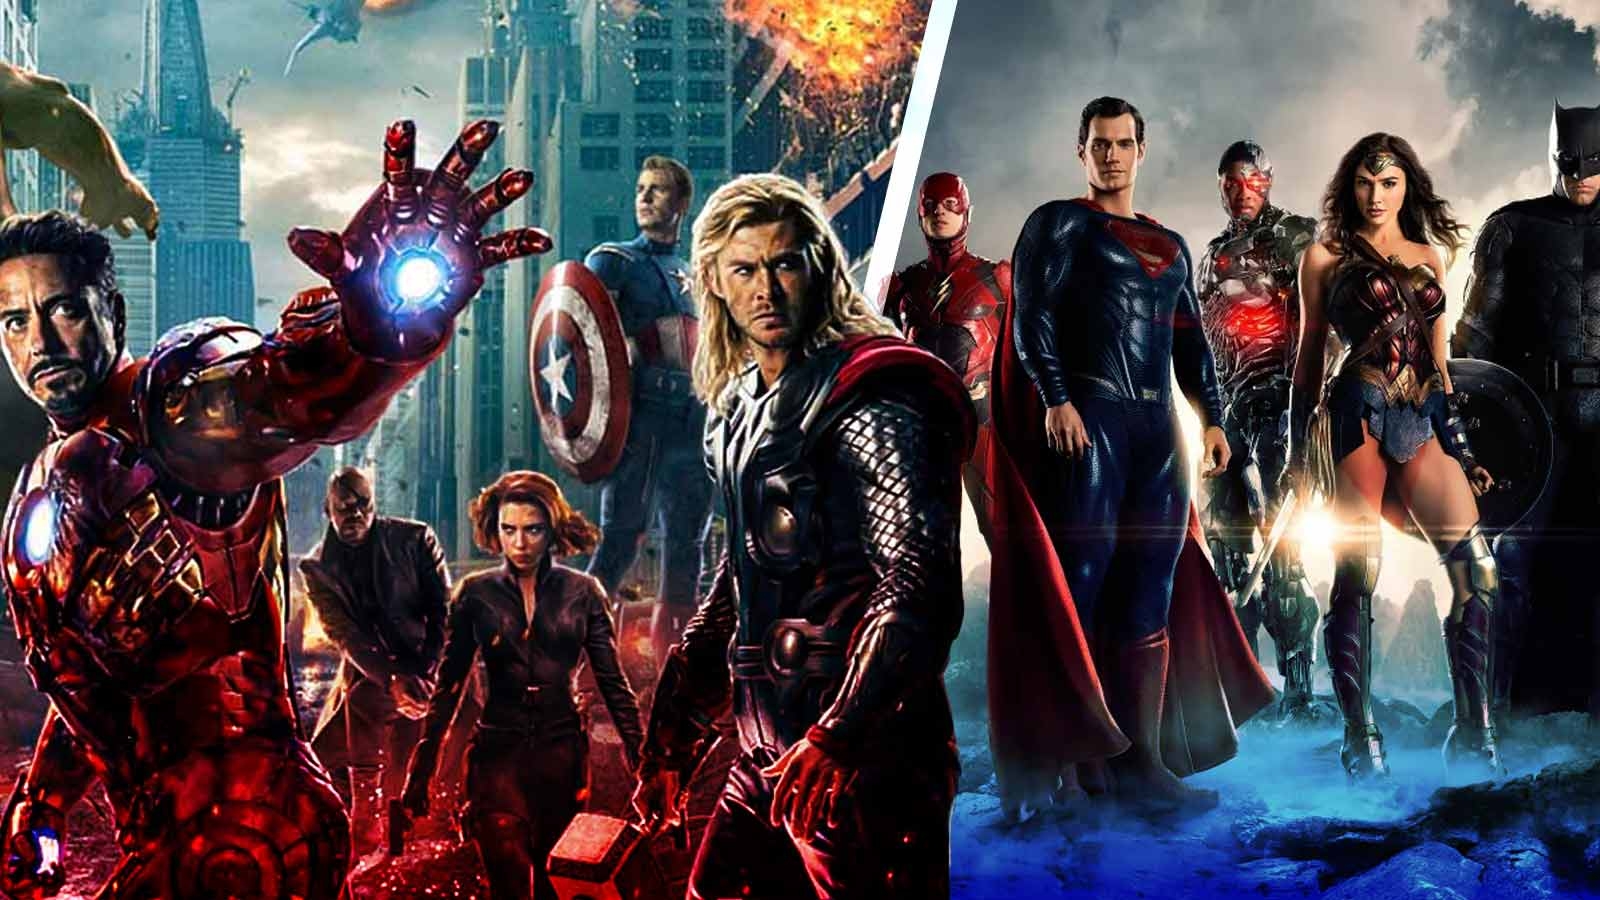 “I just lost my shit”: 1 Wild Scene from ‘The Avengers’ Made the ‘Justice League’ Director Realize ‘Oh! It’s about me!’